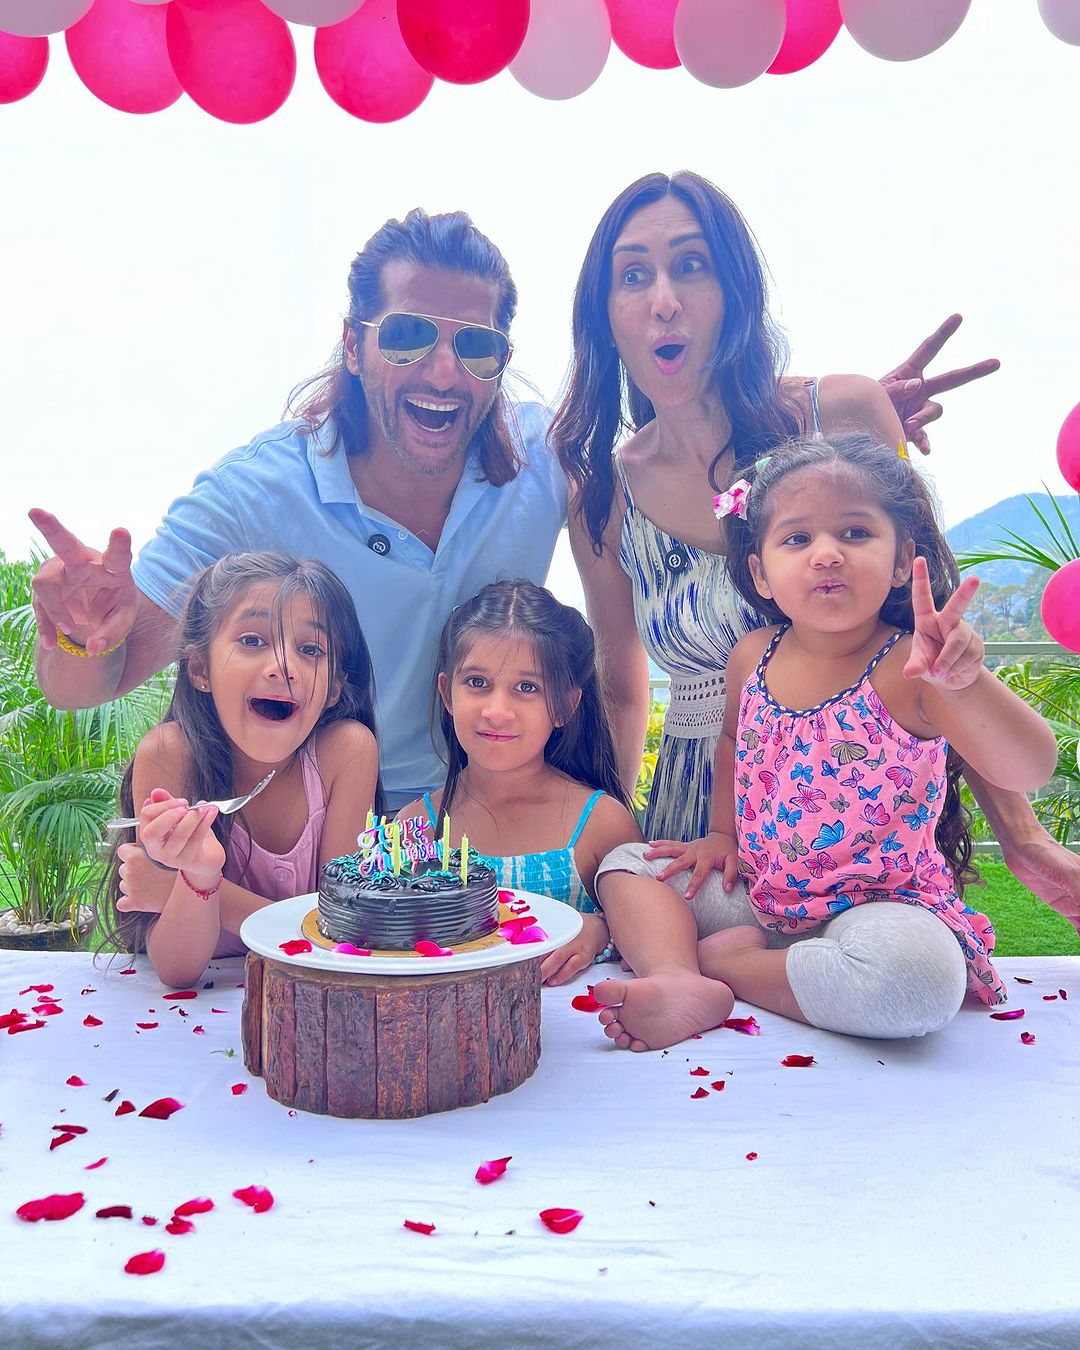 Blissful Vibes! Handsome Actor Karanvir Bohra And His Wife Teejay Sidhu Celebrate 17 Years Of Togetherness. They Share A Sweet Note For Each Other!